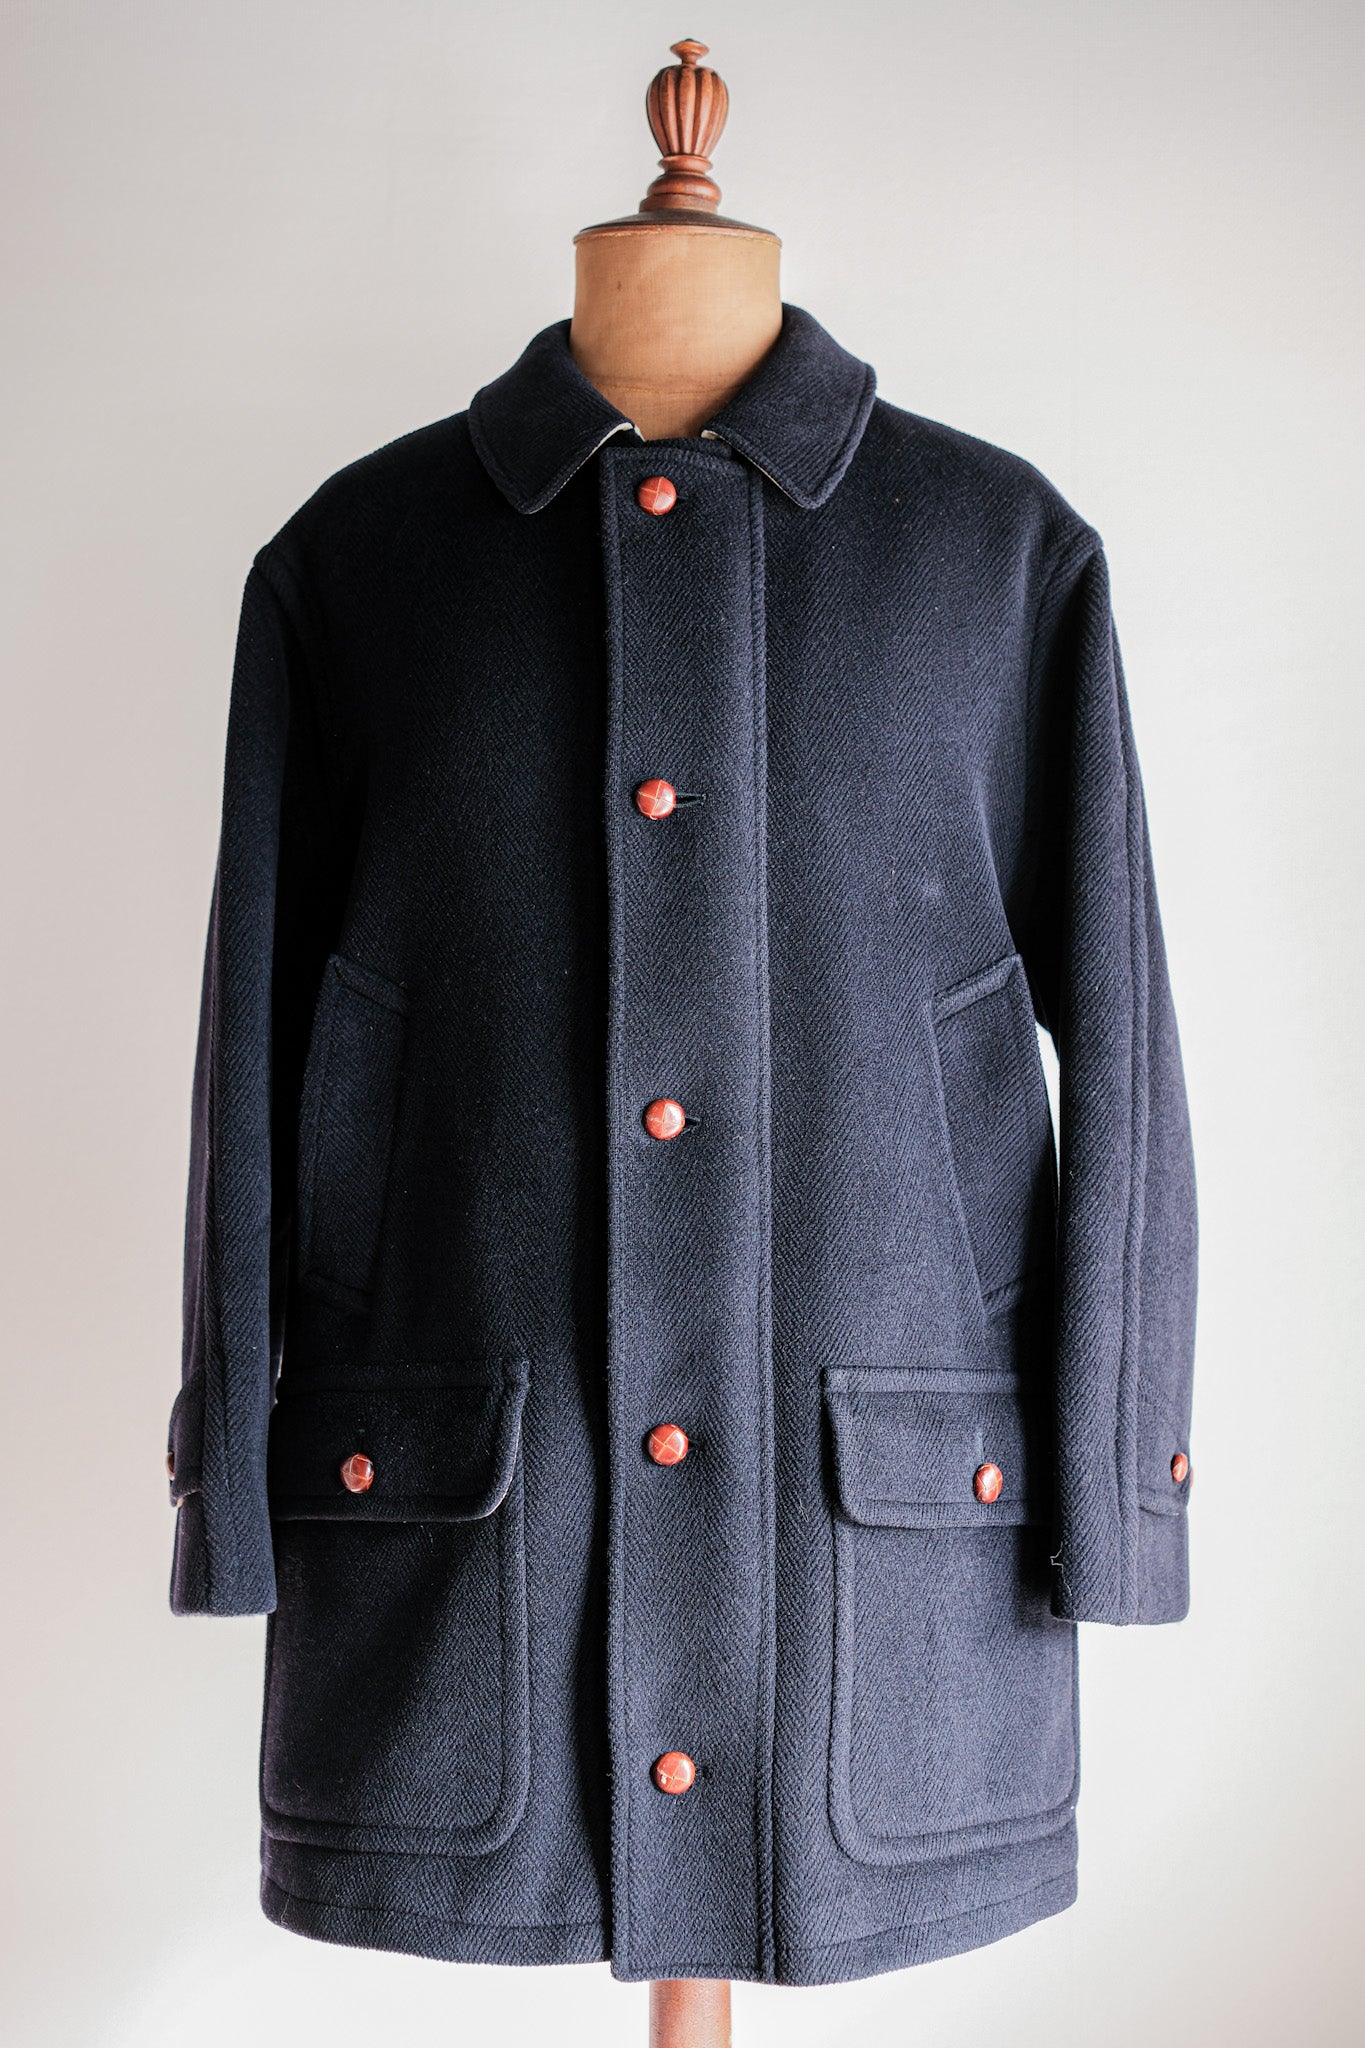 [~ 90's] Old Invertere HBT Wool Jacket with China Strap Size.40 "Moorbrook"